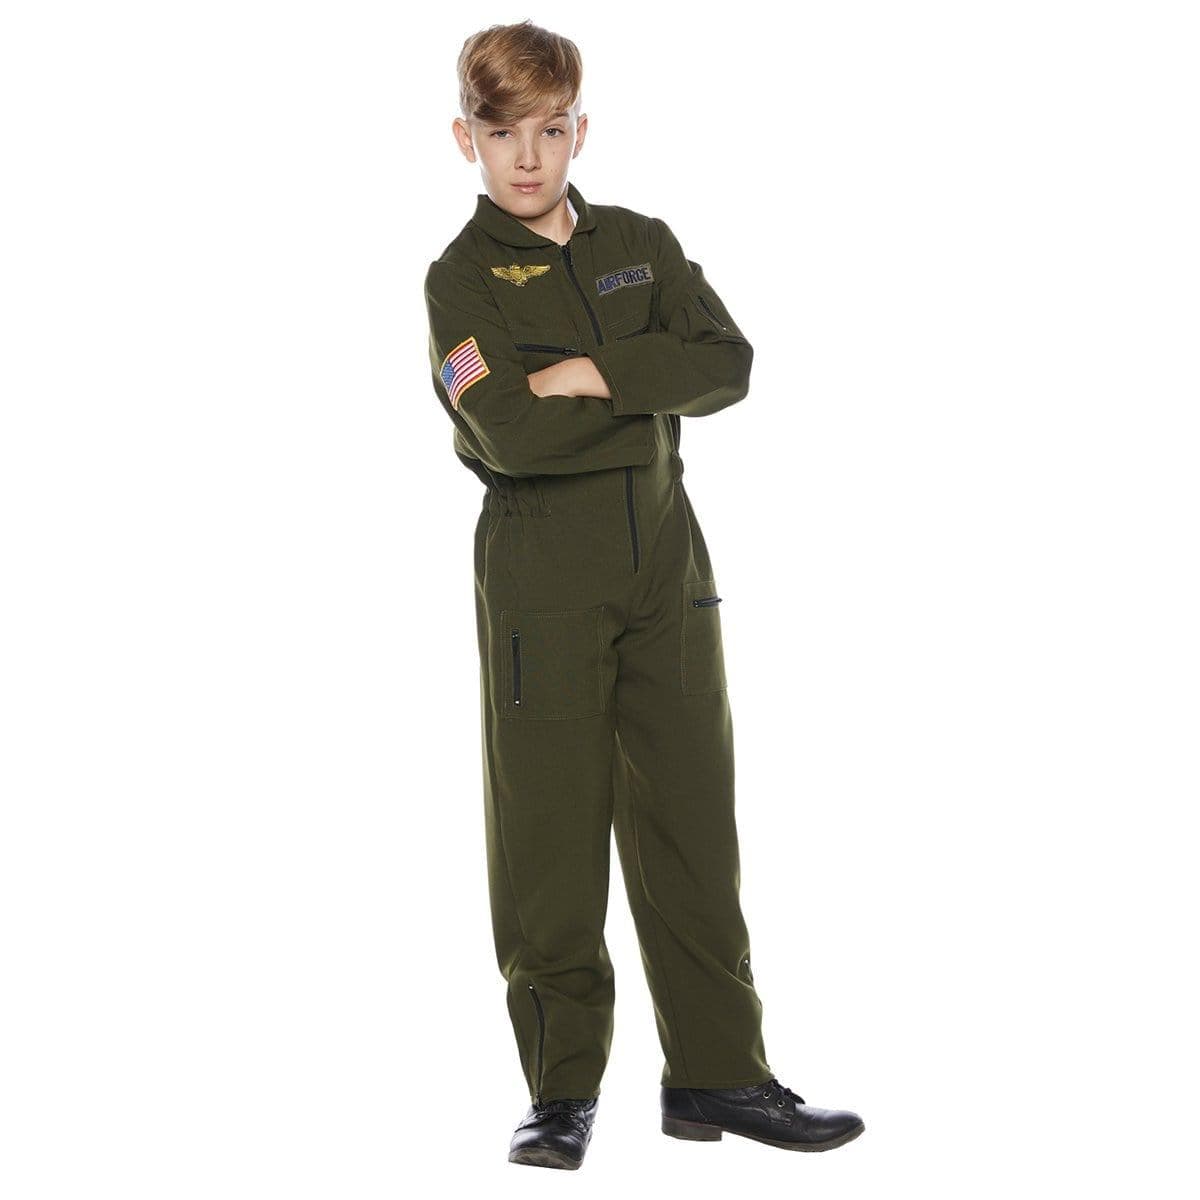 Buy Costumes Kaki Flight Suit for Kids sold at Party Expert